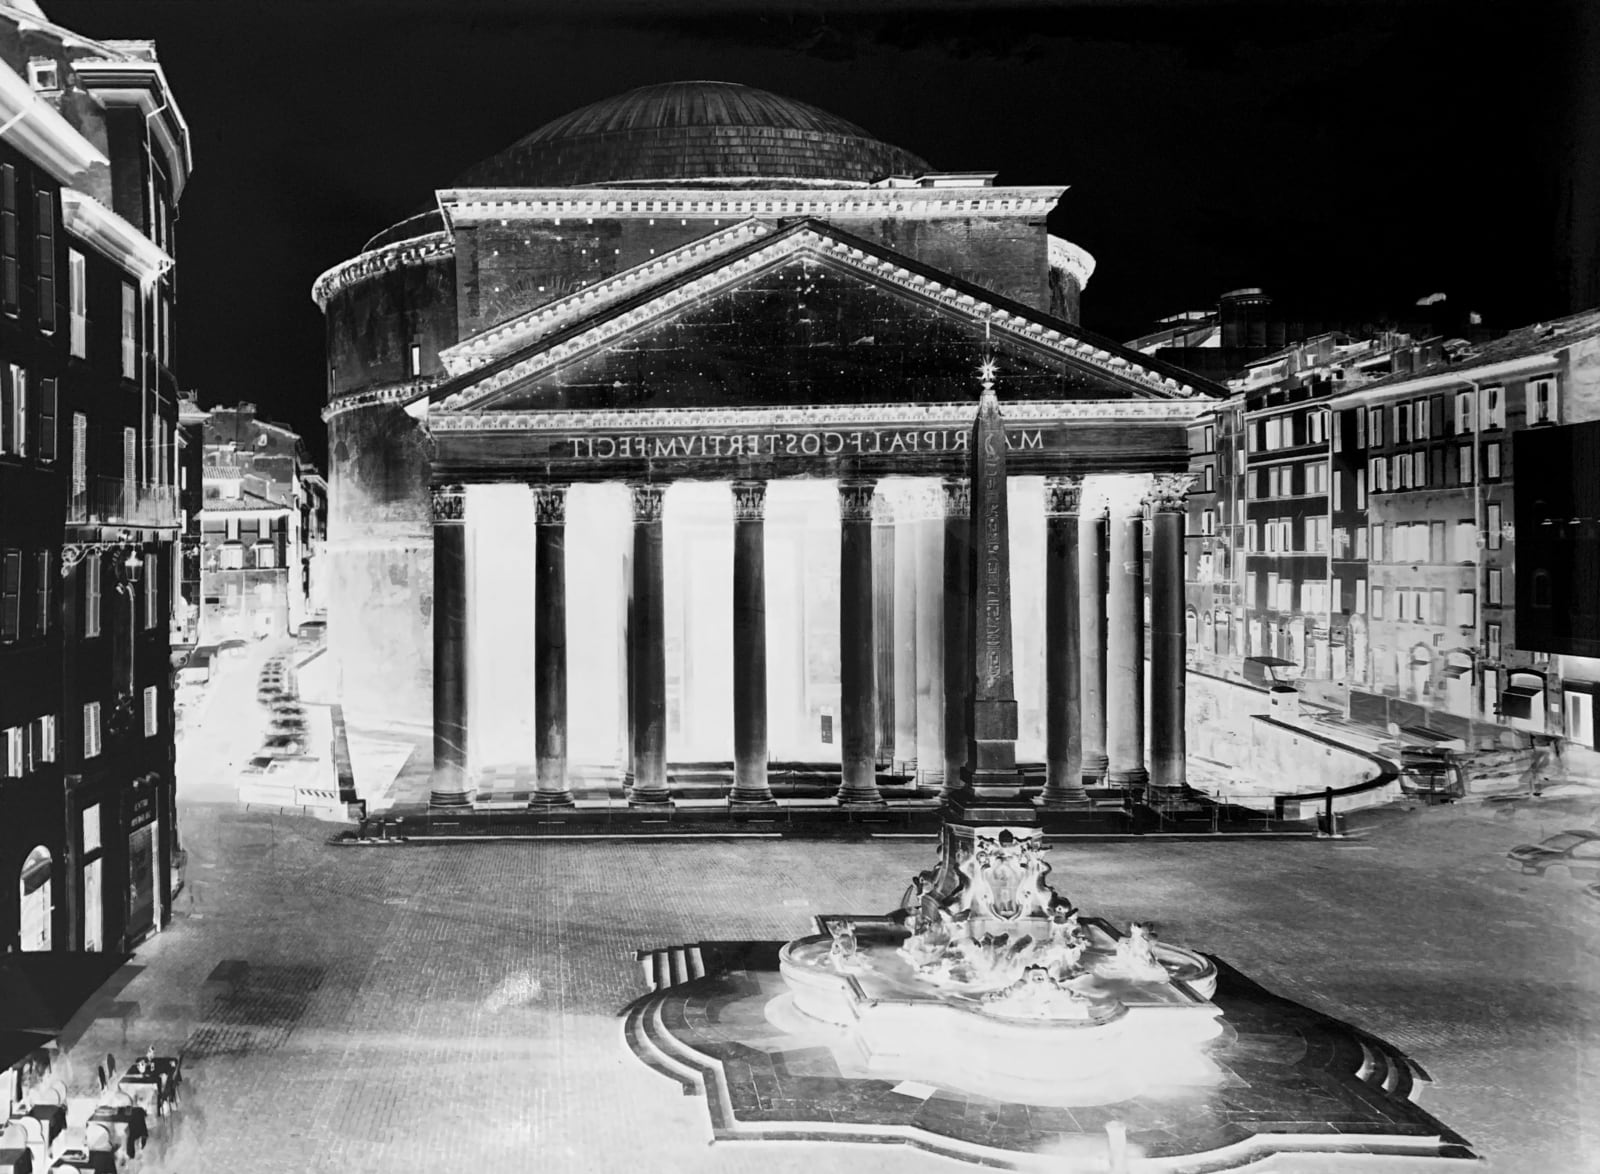 Pantheon, Rome, June 23, 2020 camera obscura photograph by Vera Lutter